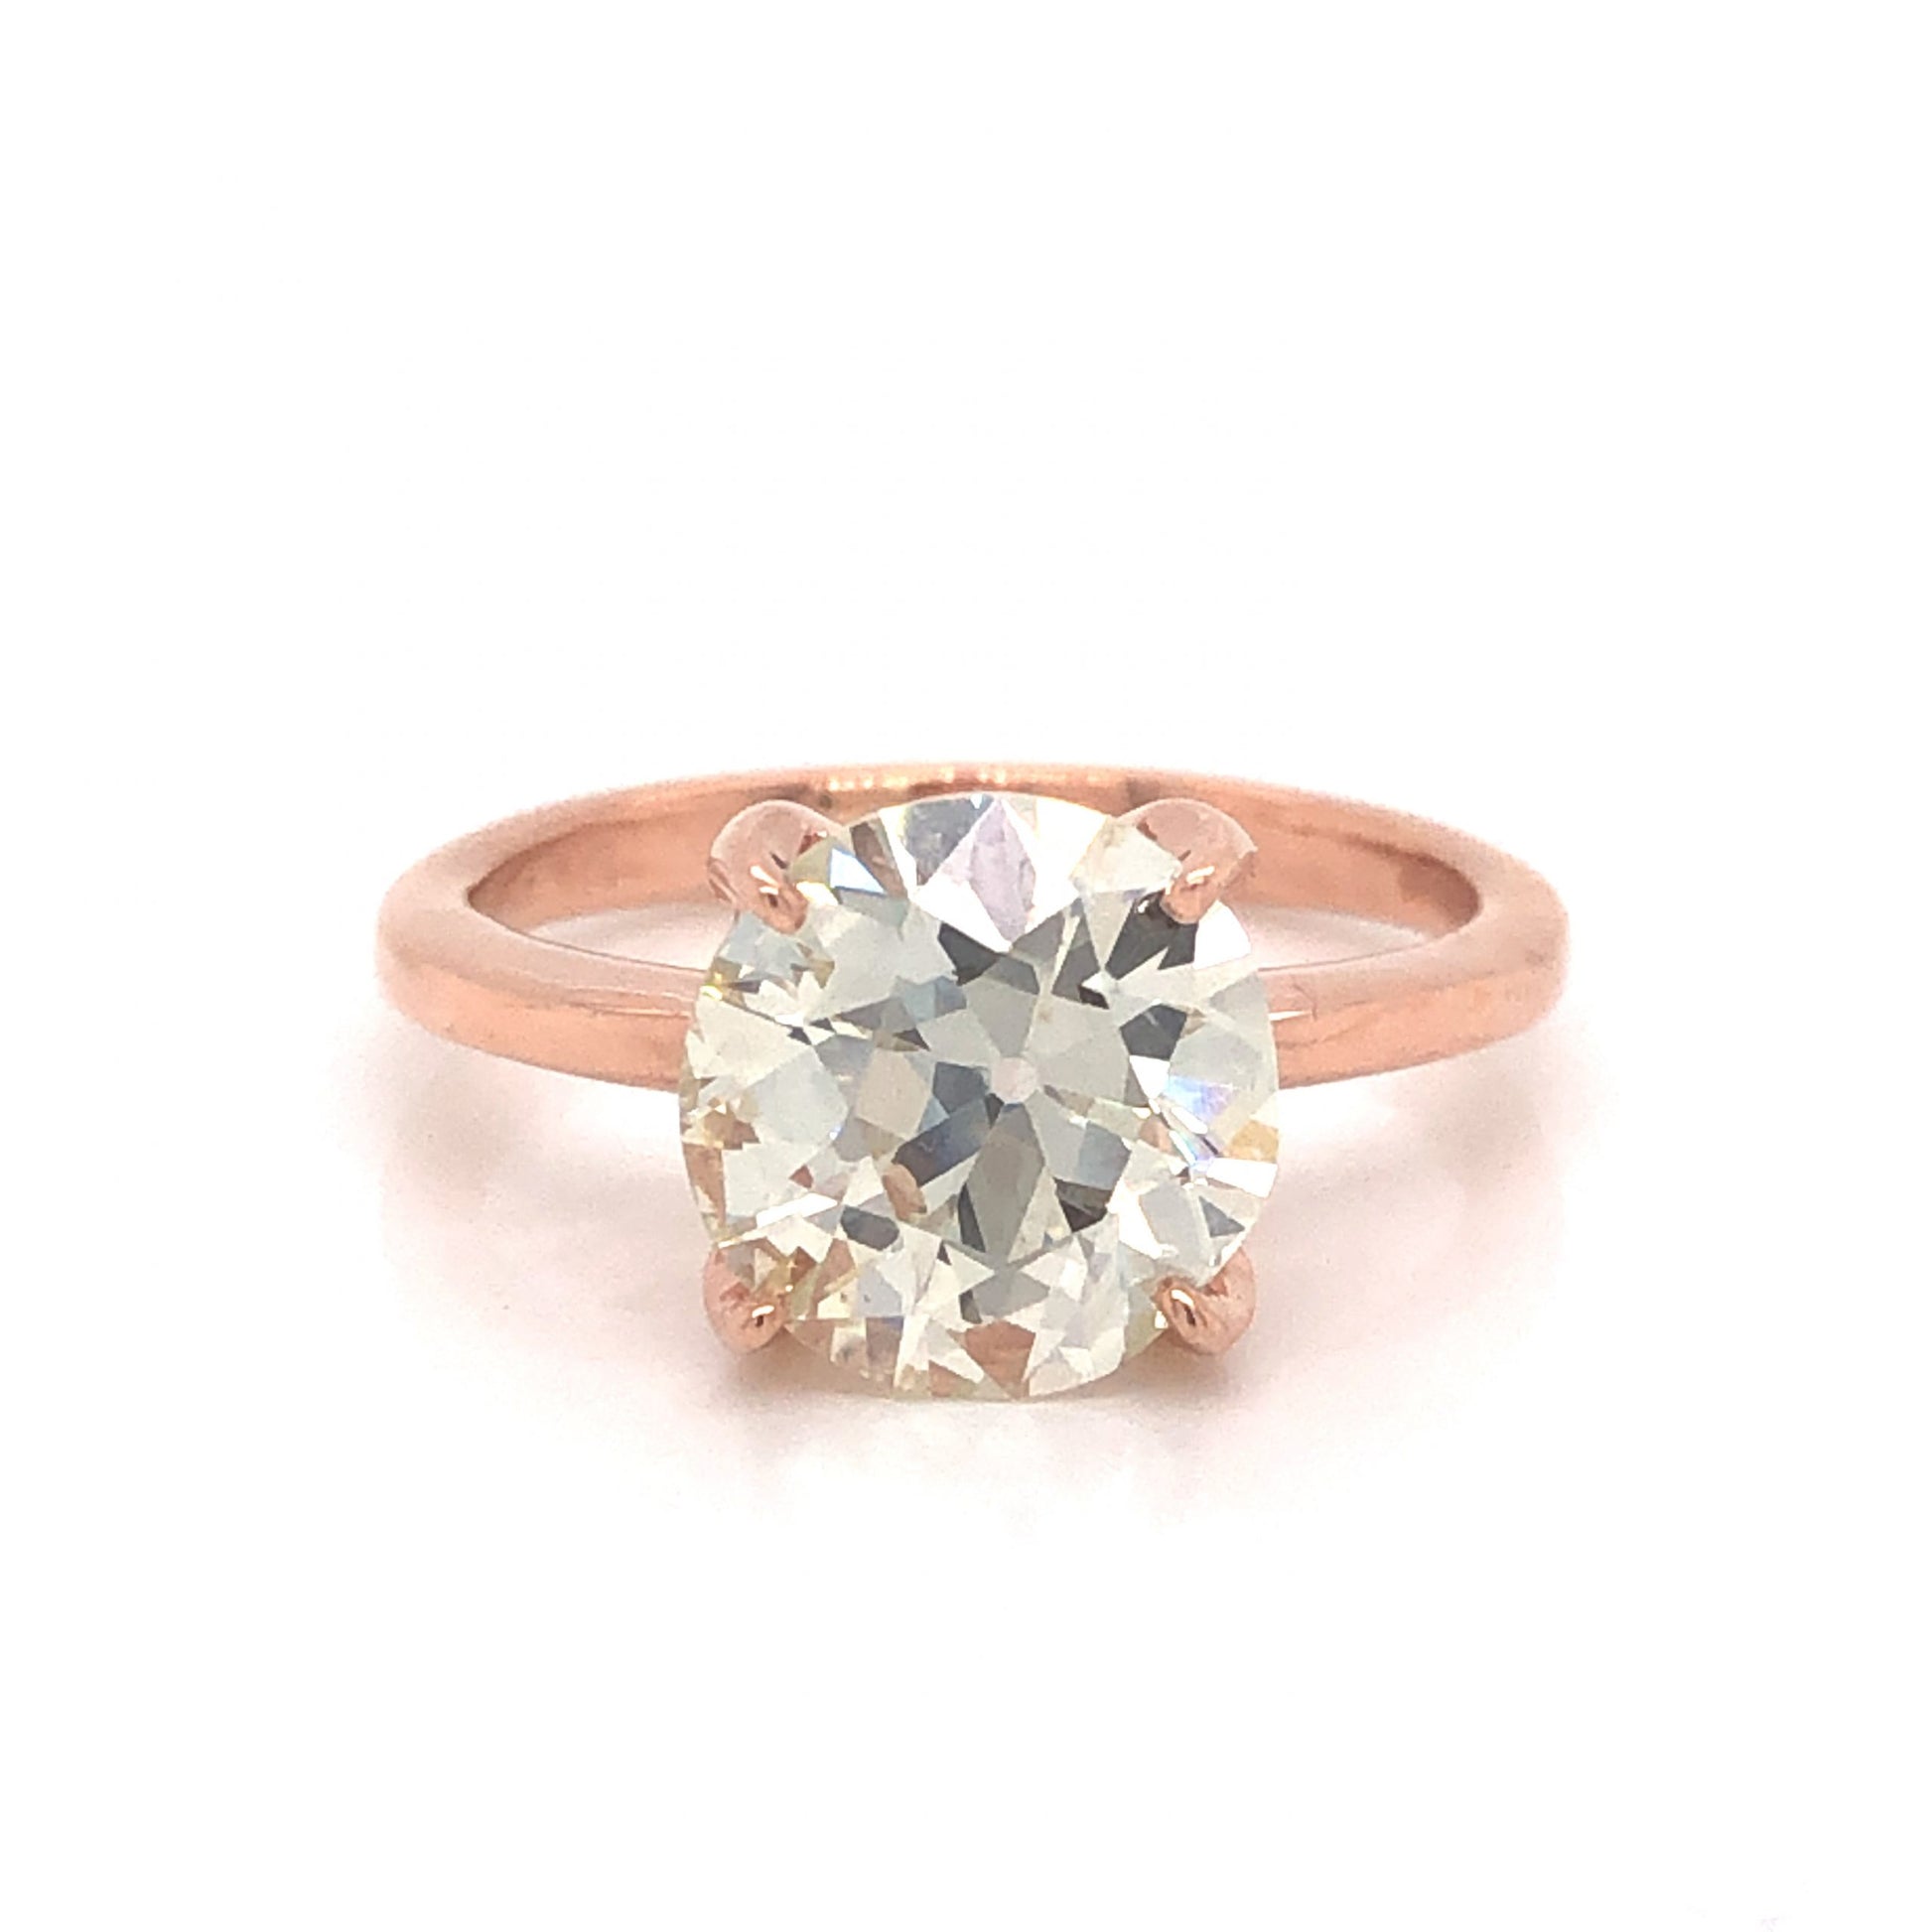 2.28 GIA Solitaire Diamond Engagement Ring in 14k Rose GoldComposition: PlatinumRing Size: 4.75Total Diamond Weight: 2.28 ctTotal Gram Weight: 3.1 gInscription: 14k 